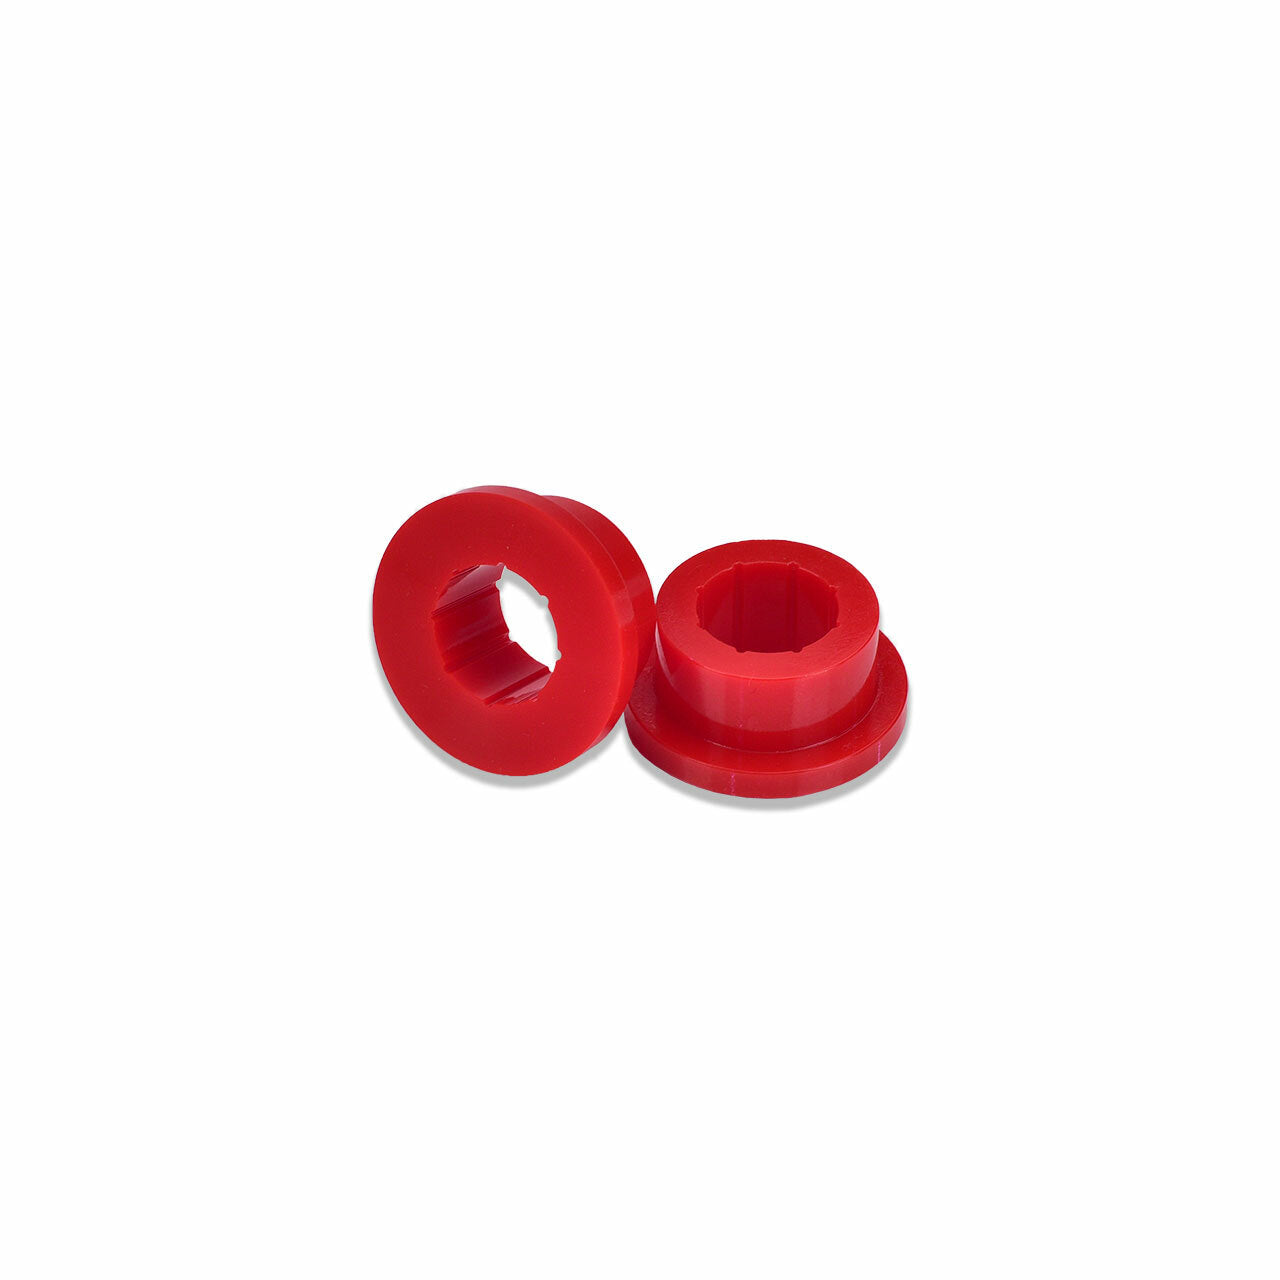 IAG Competition Series Pitch Mount Bushing Kit 90A Durometer on Bleeding Tarmac